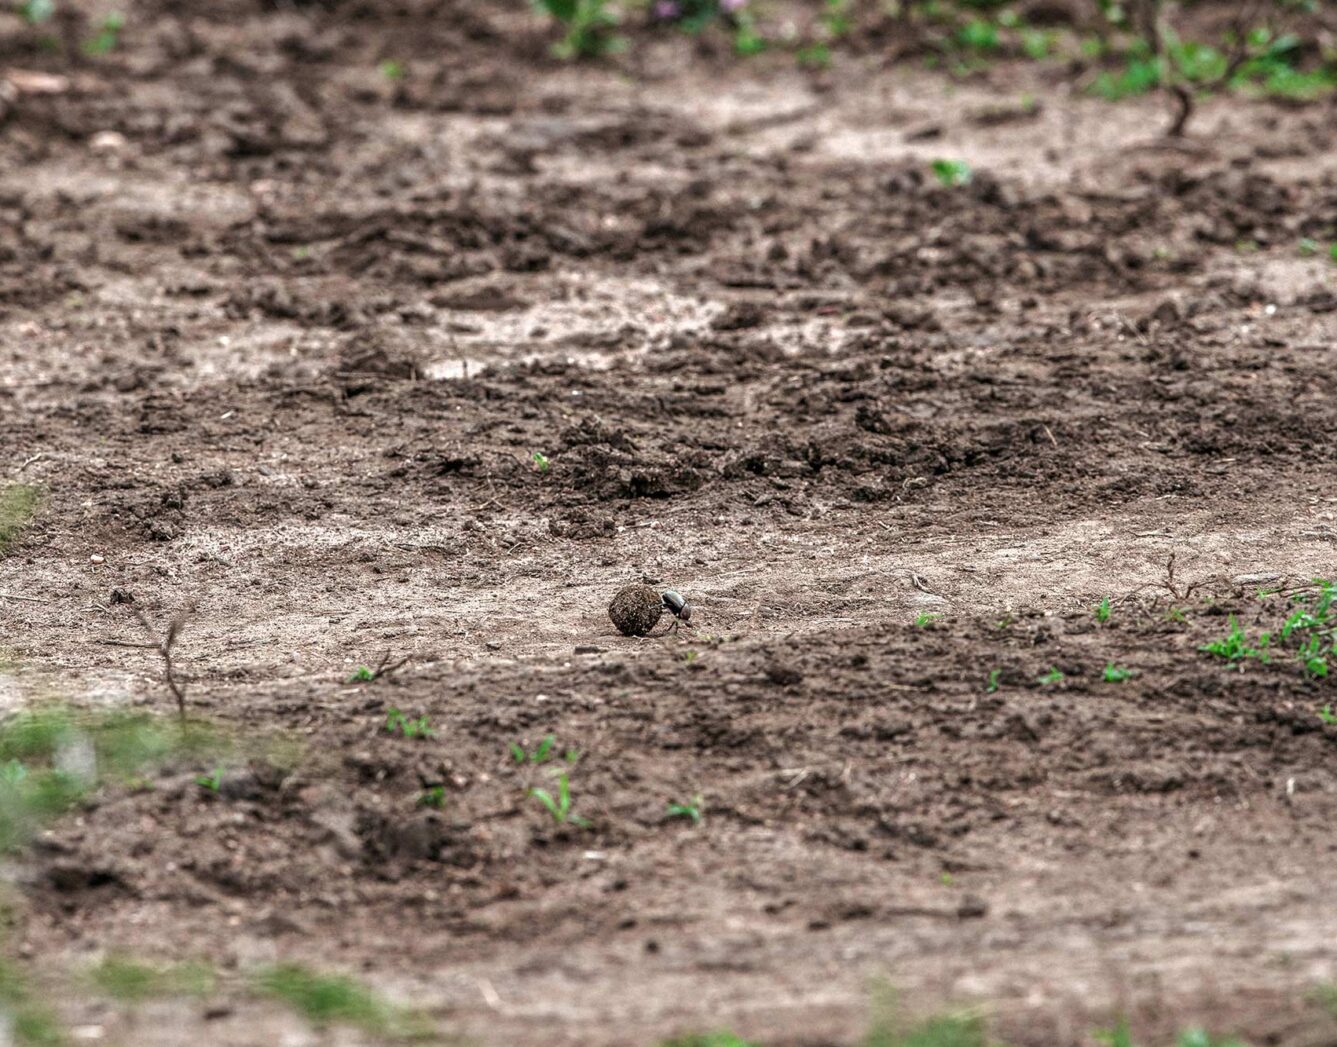 A dung beetle rolling a ball across the dirt